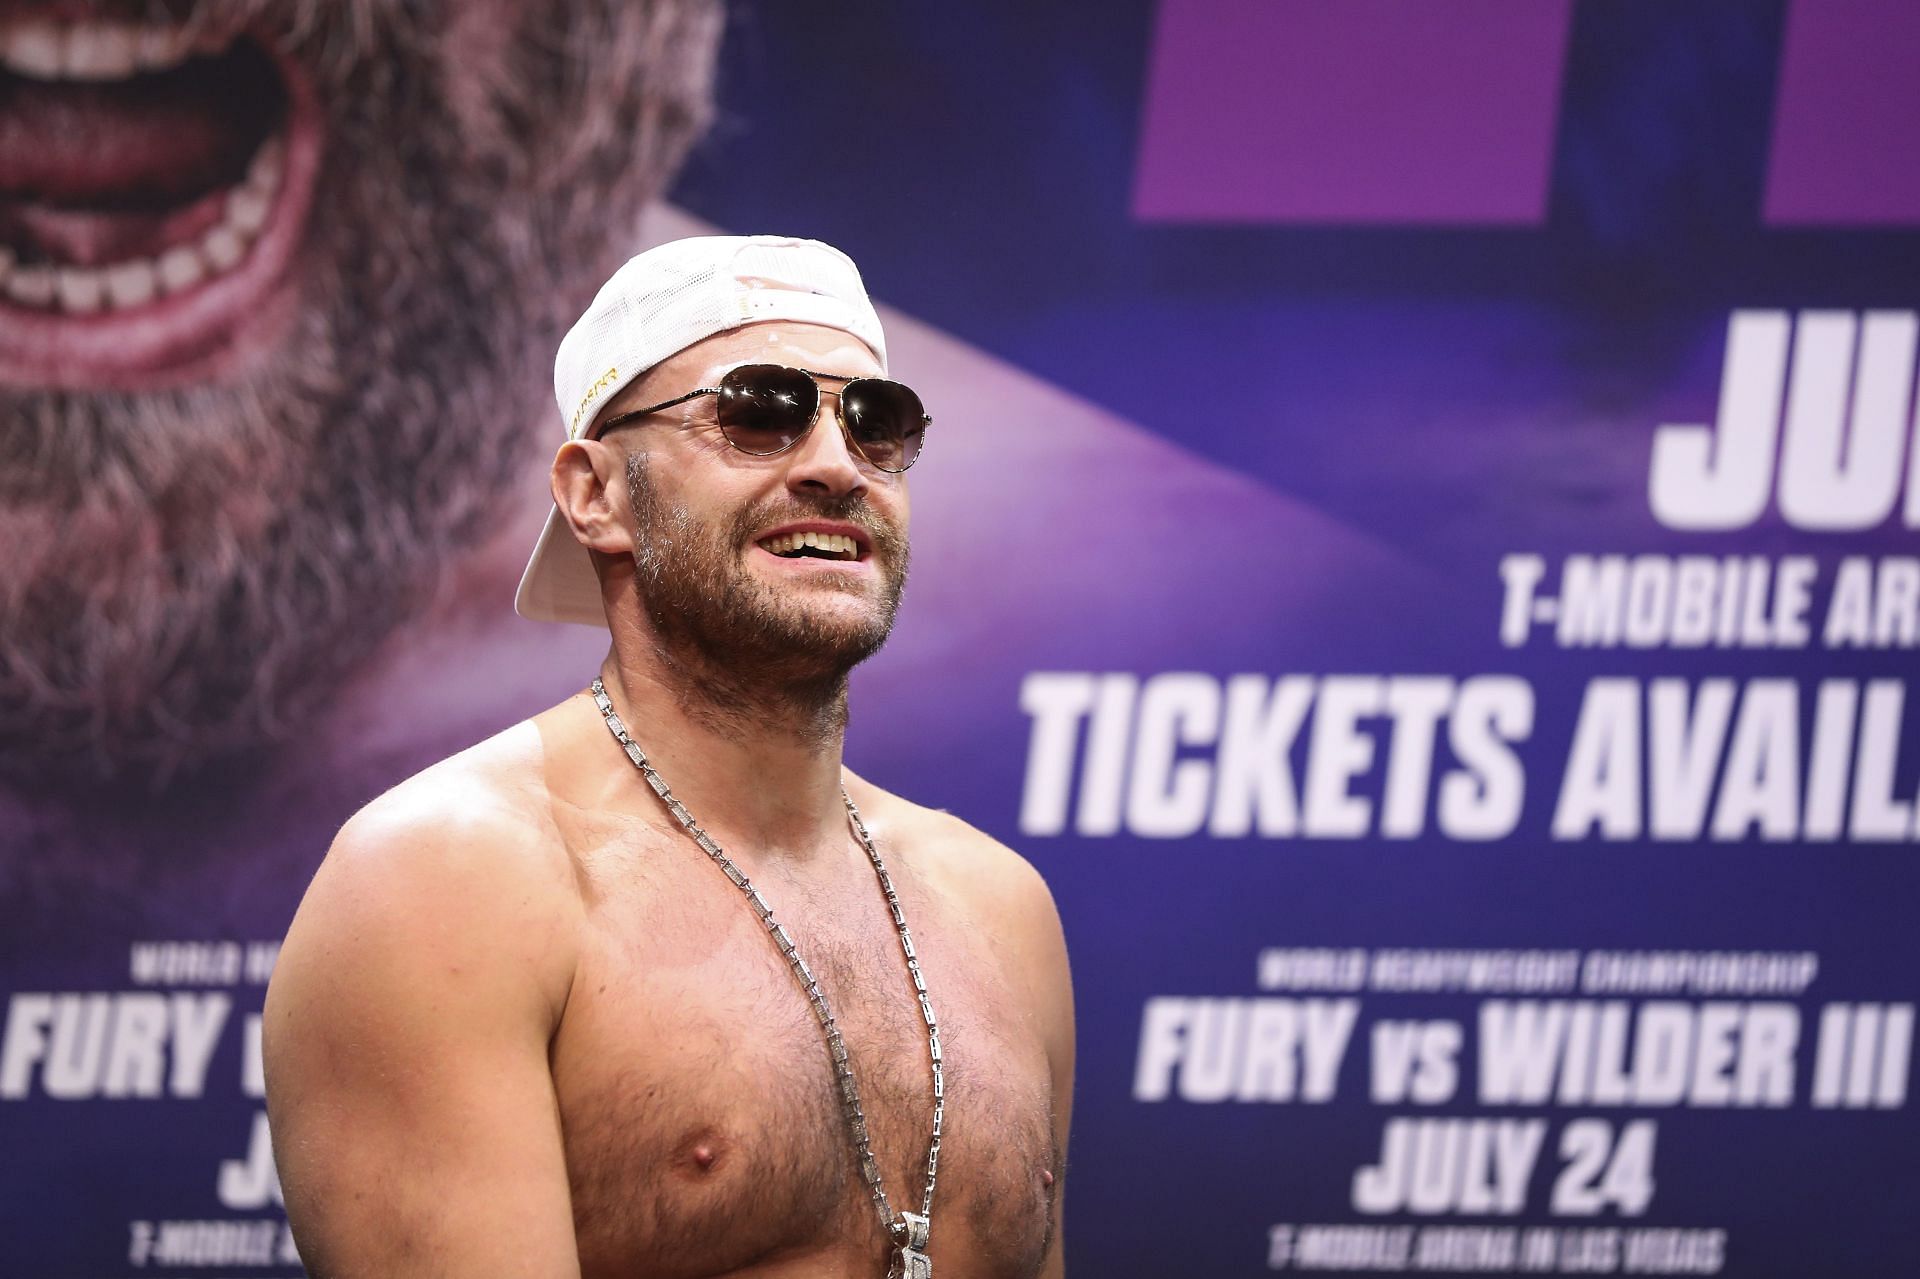 Tyson Fury at the press conference for Wilder vs. Fury 2